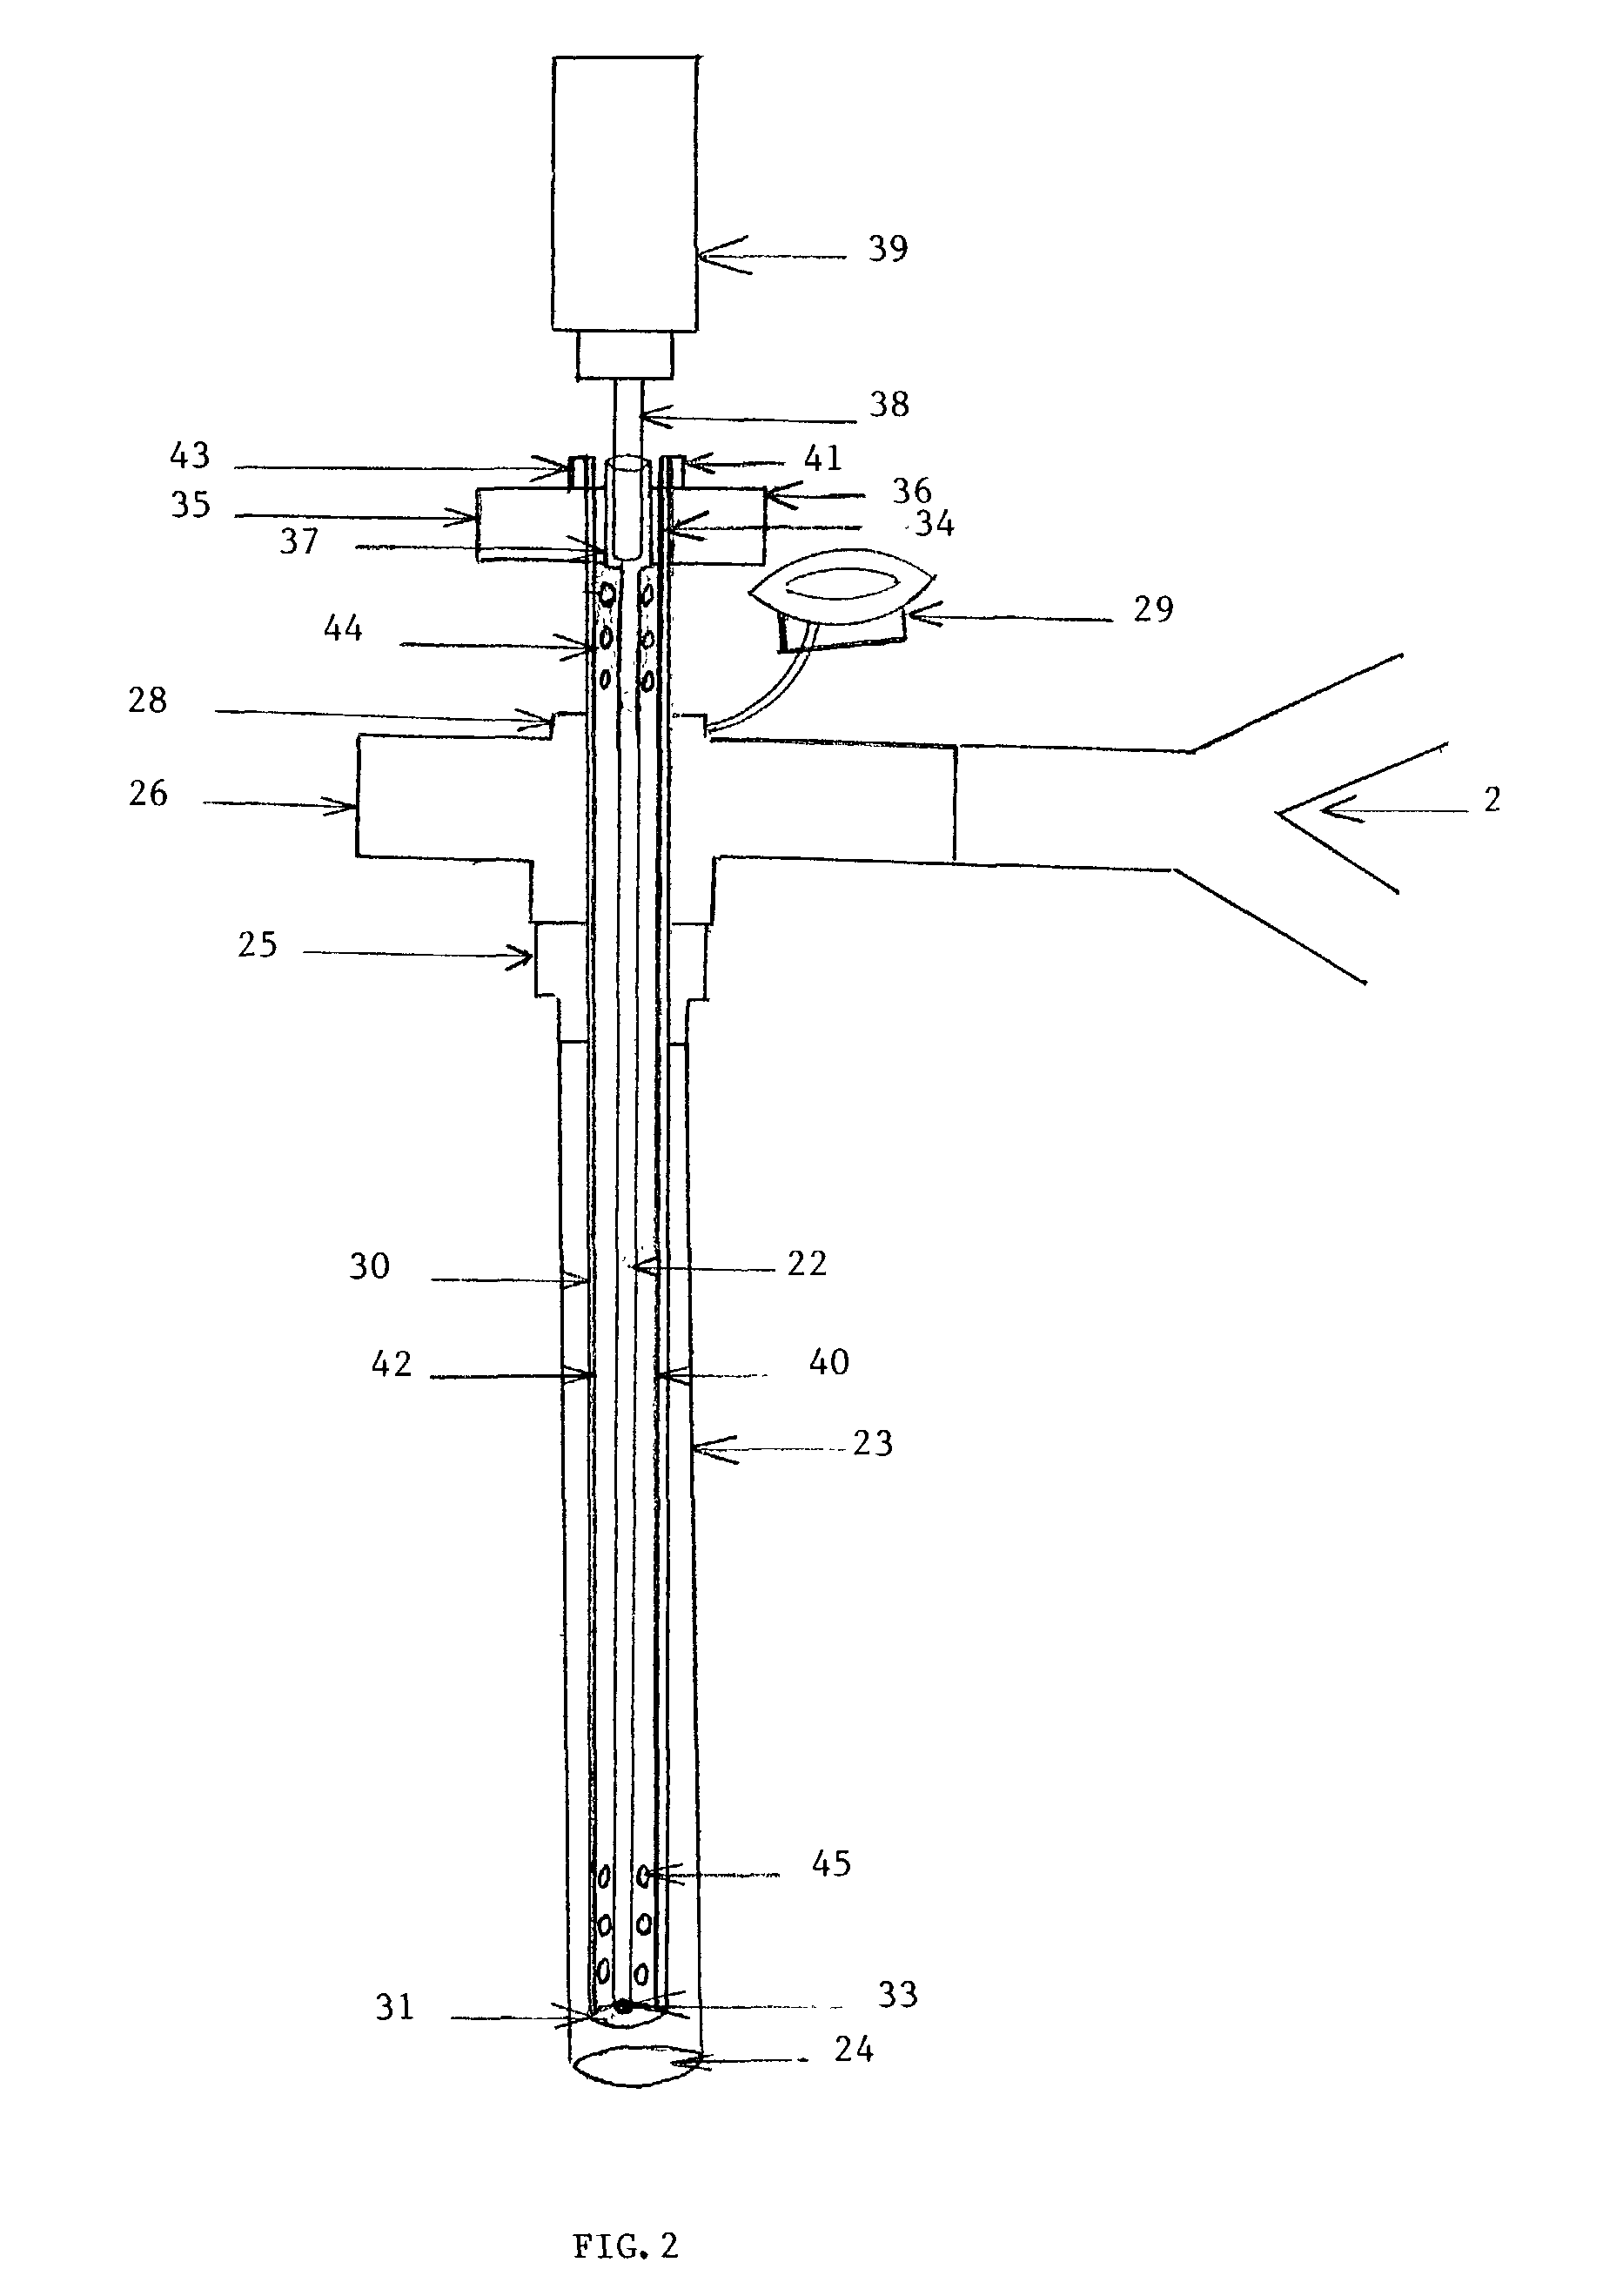 Endotracheal tube with feature for delivering aerosolized medication